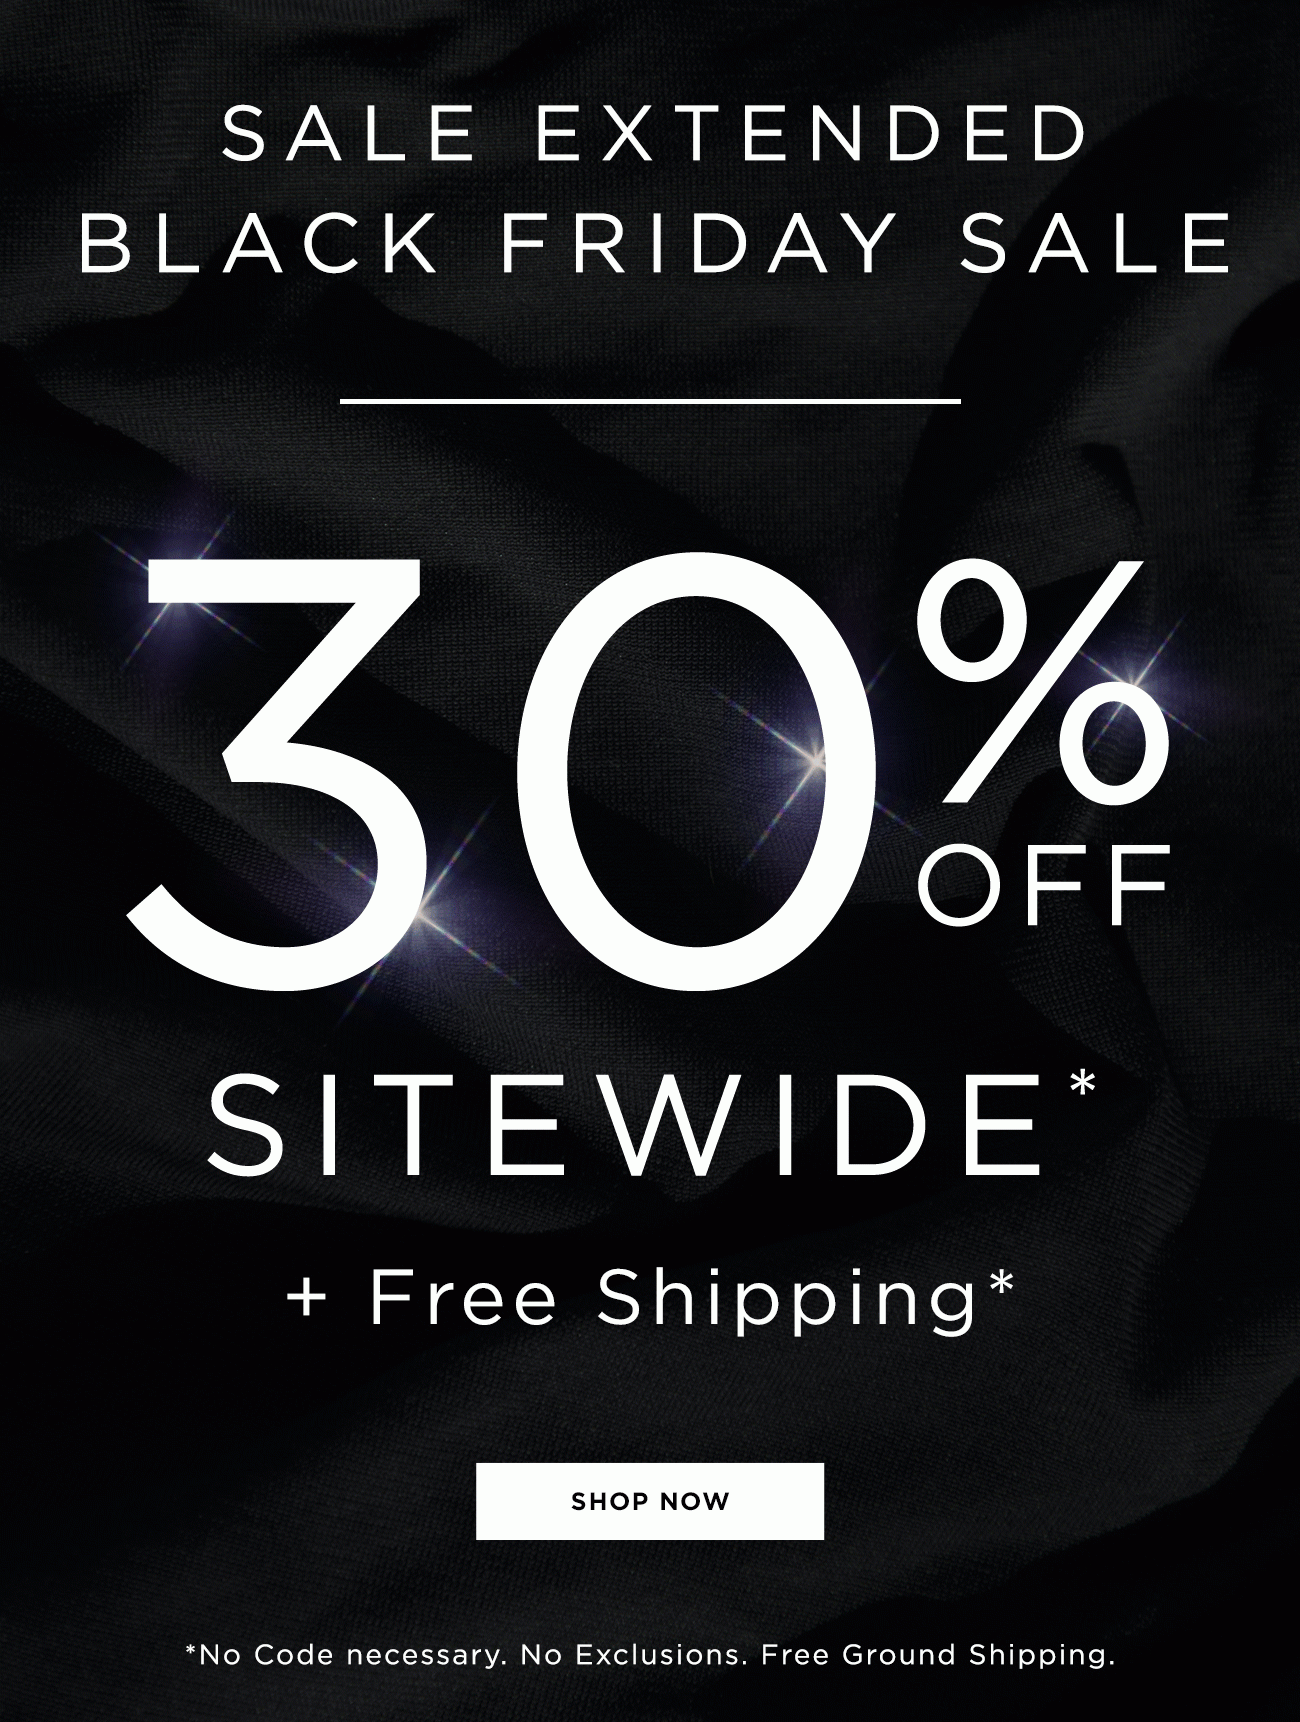 Sale Extended - Black Friday Sale - 30% Off Sitewide + Free Shipping